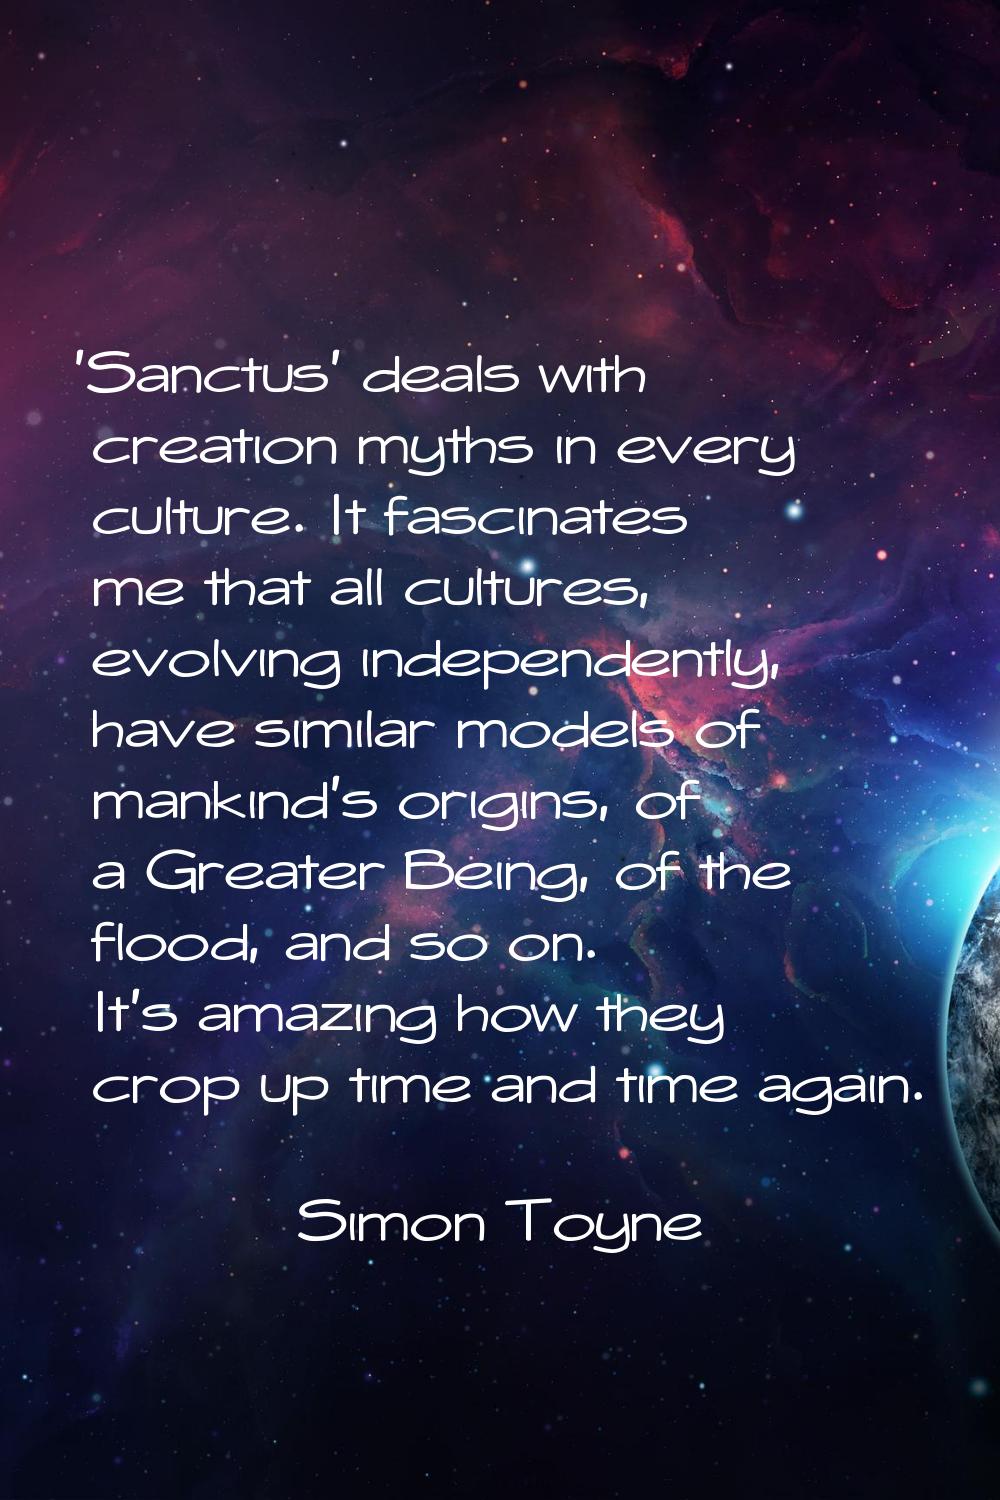 'Sanctus' deals with creation myths in every culture. It fascinates me that all cultures, evolving 